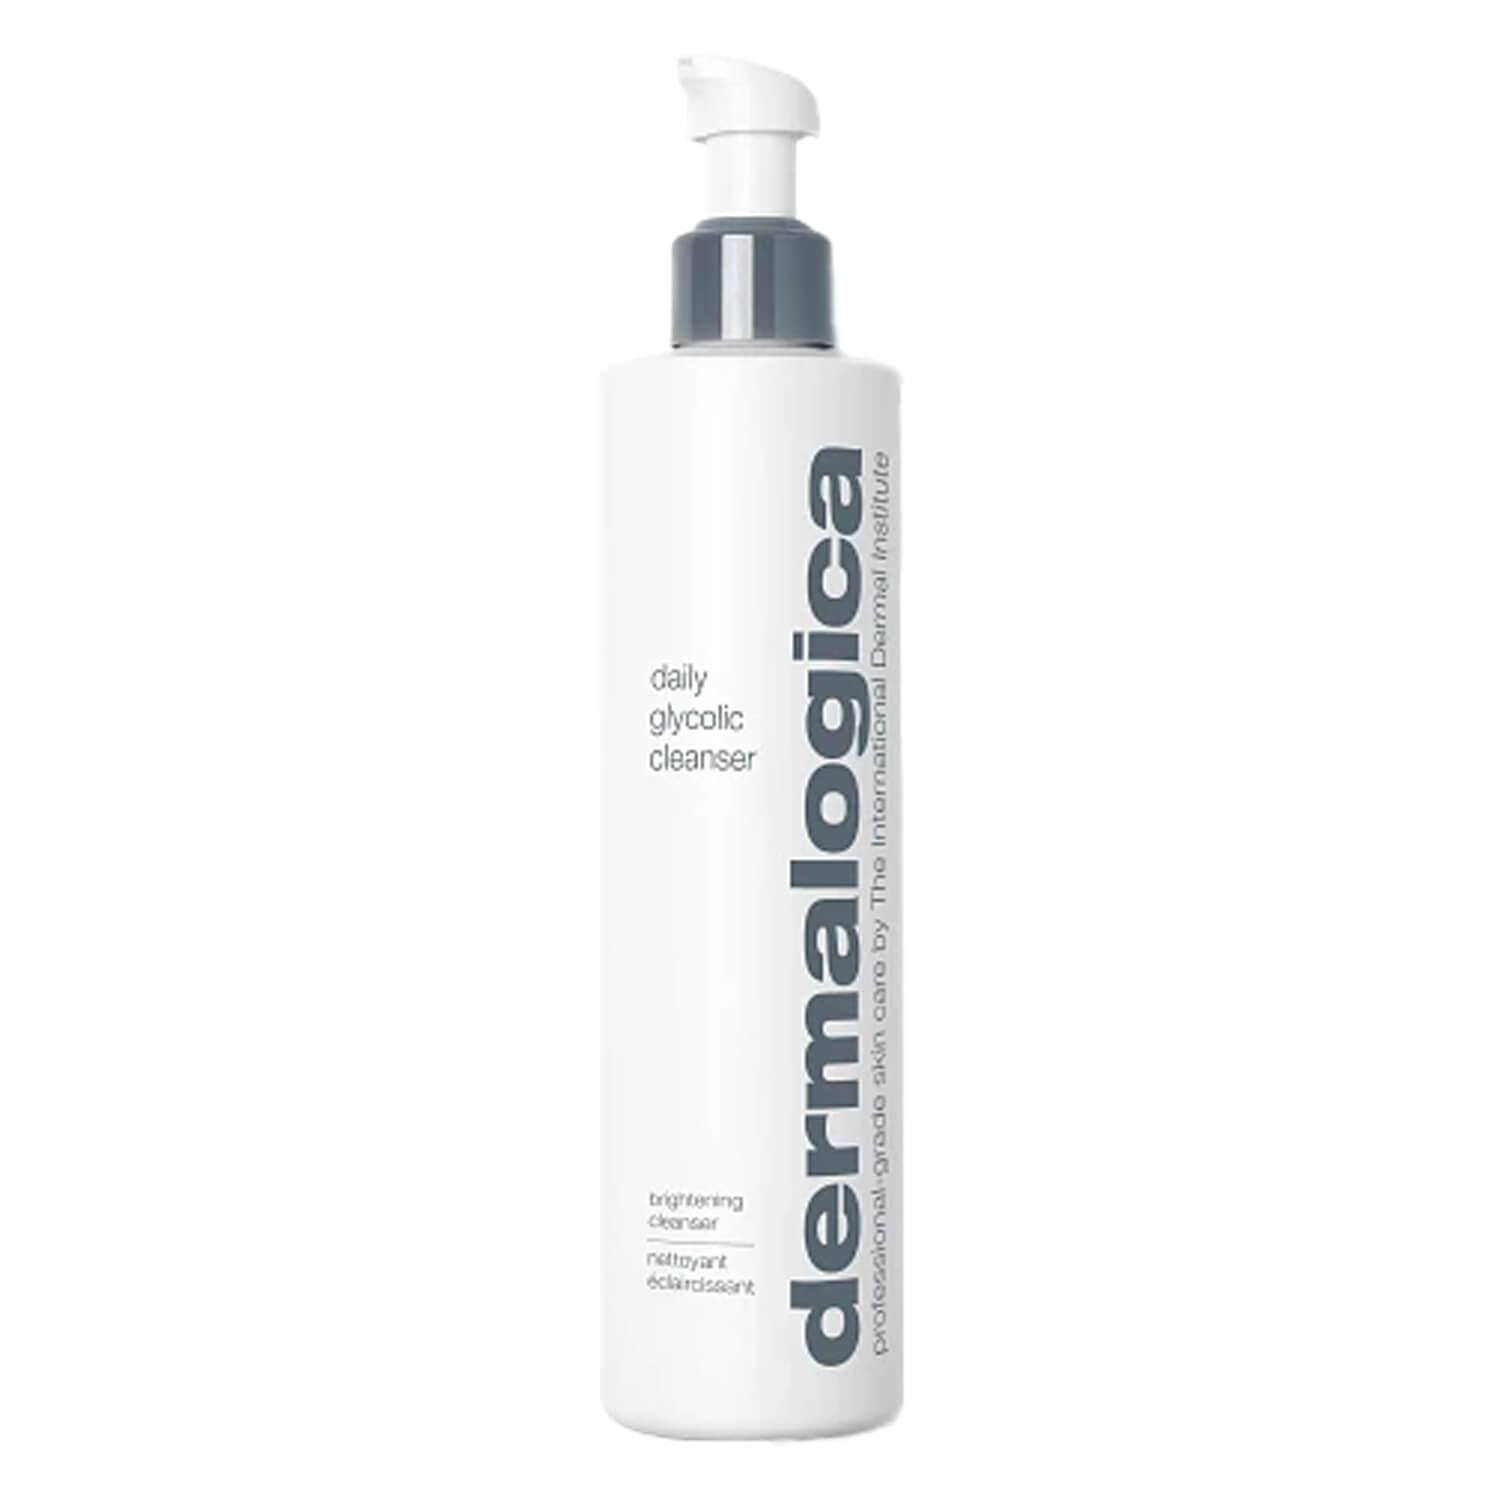 Daily Skin Health - Daily Glycolic Cleanser